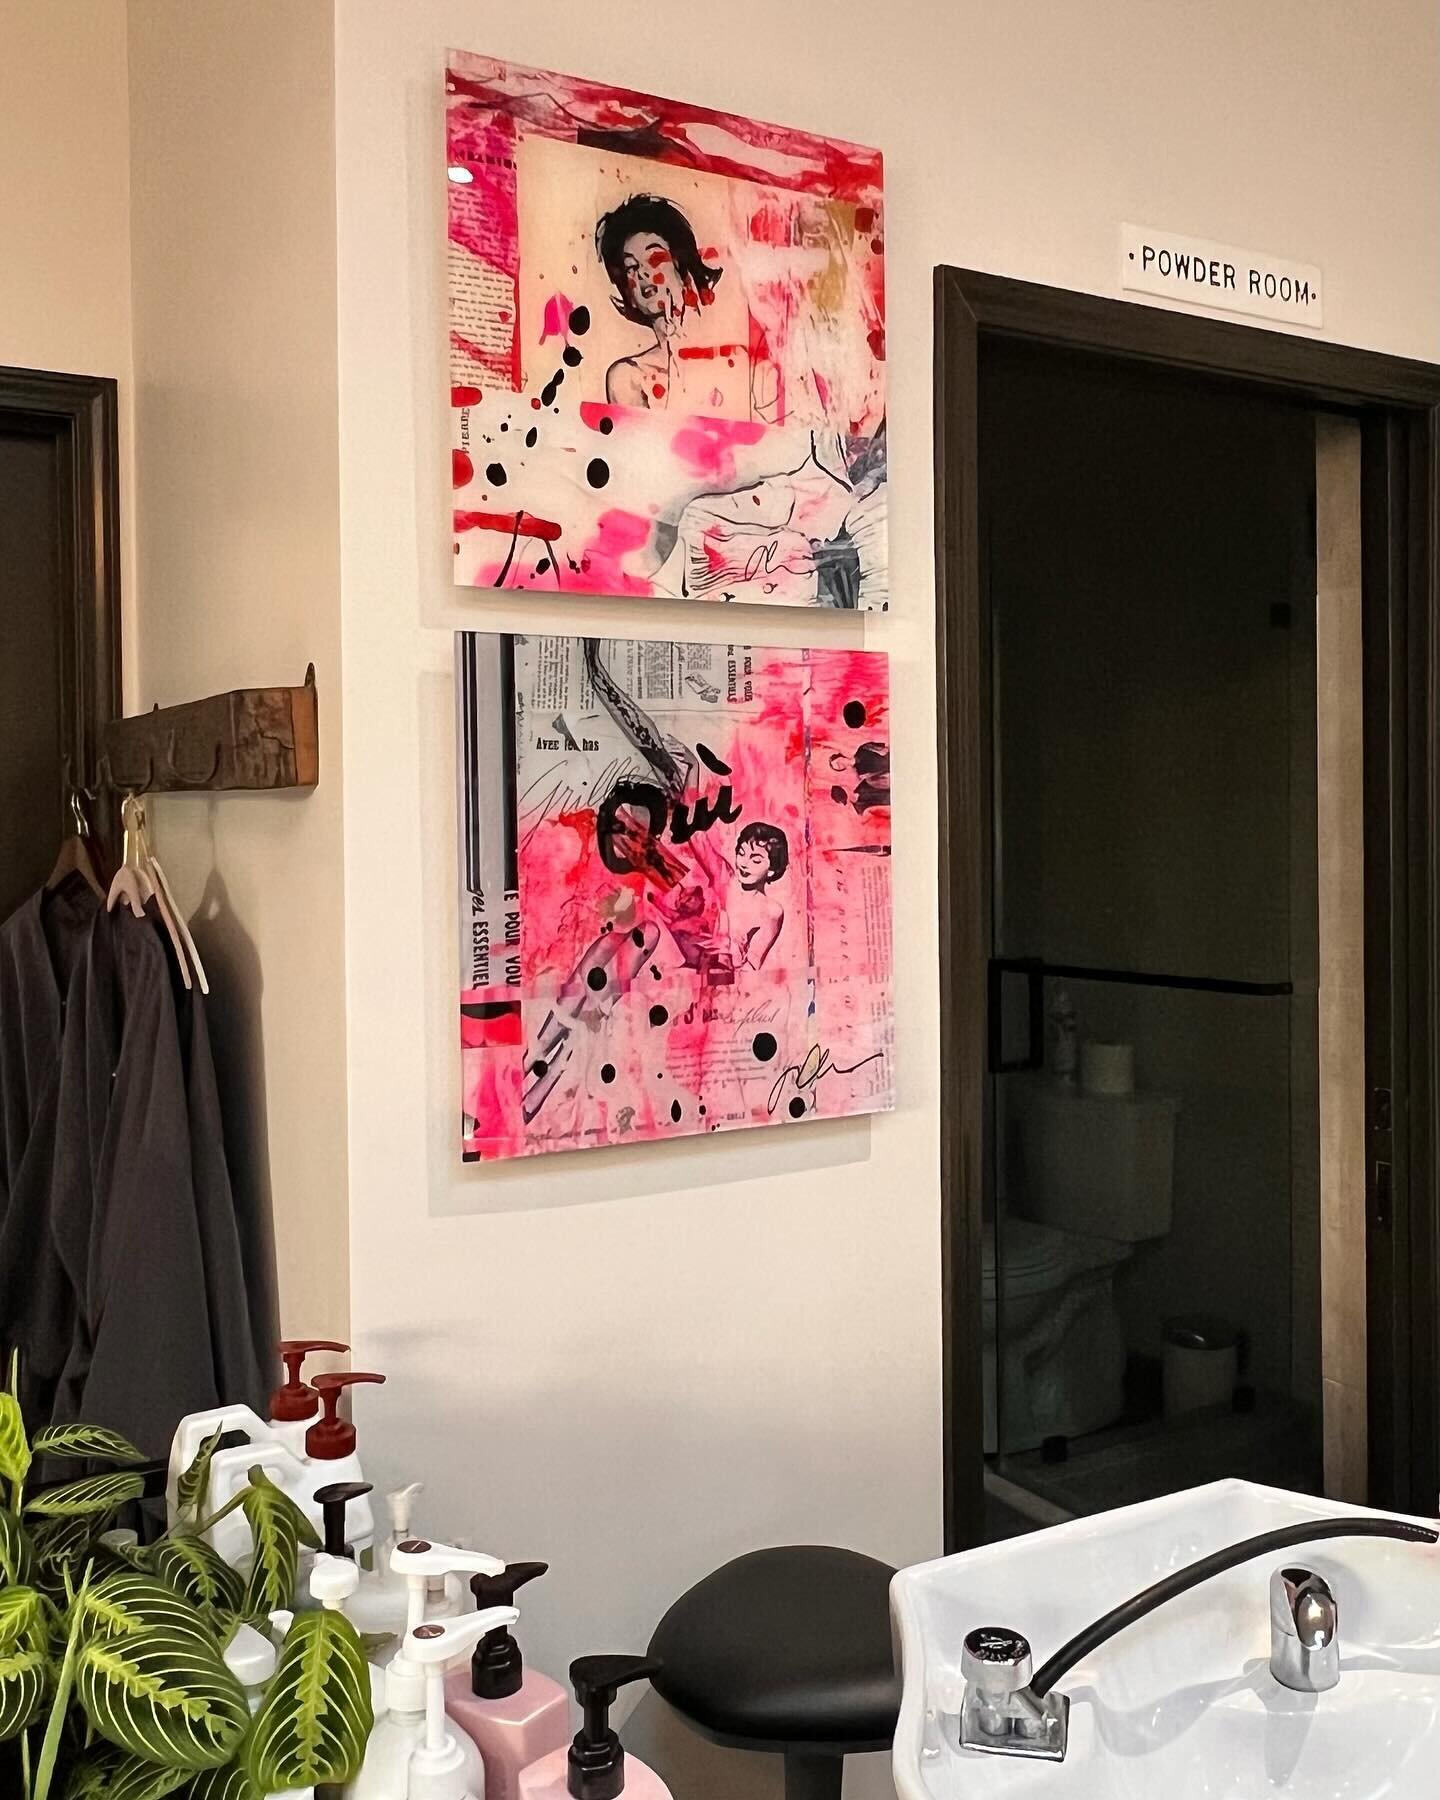 &ldquo;I love them! Thank you!&rdquo; -Stephani

As an artist it is so satisfying to not only have someone collect your work but, to know the joy it brings them. 

The 2 pieces she collected from &ldquo;Joie de Vivre&rdquo; just installed in her hair